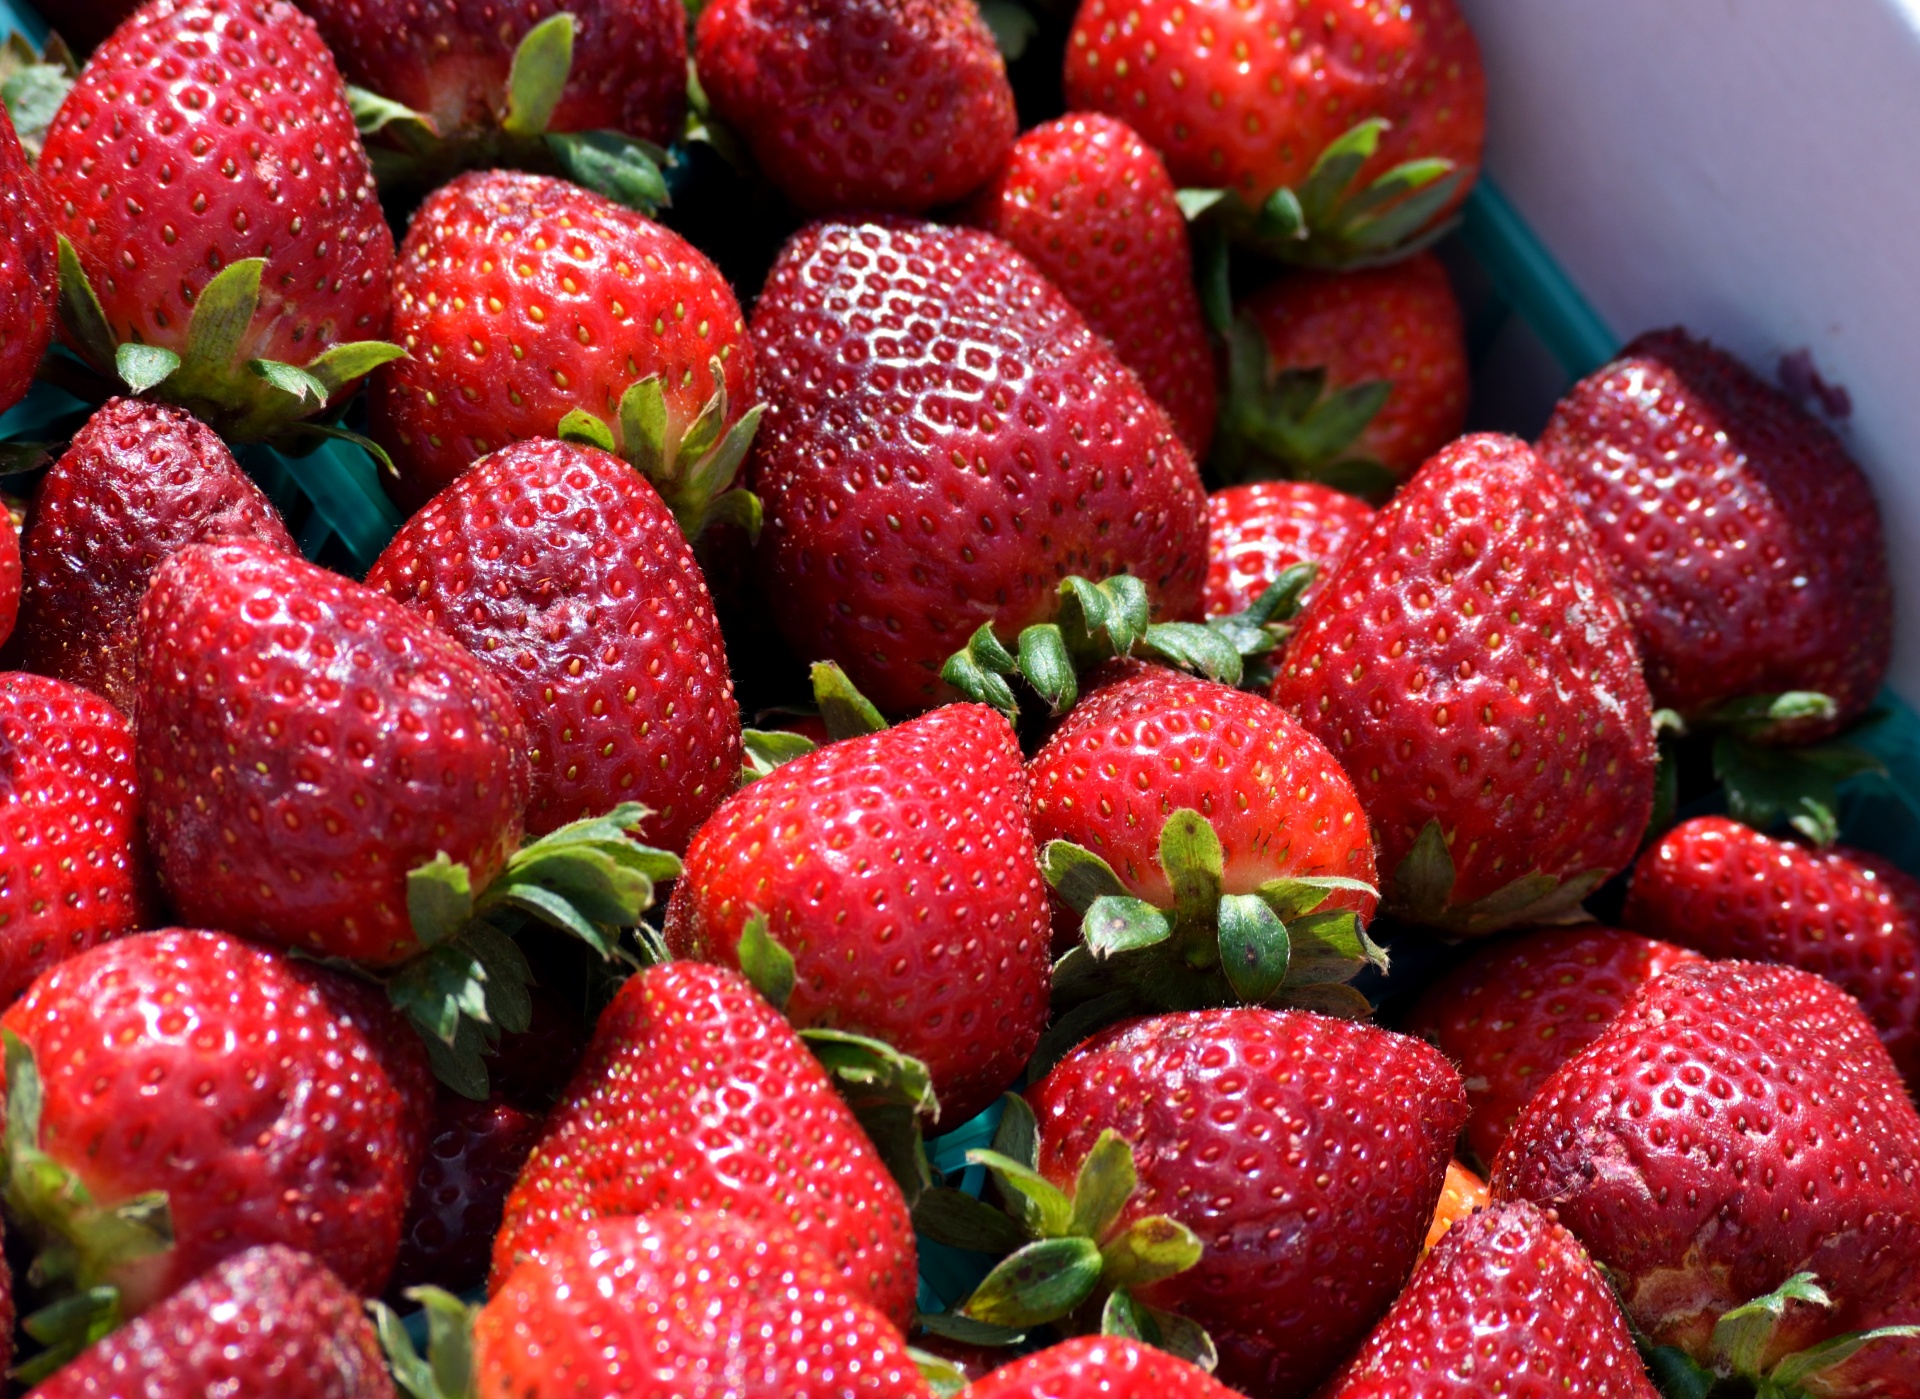 Strawberries sold at outdoor market place